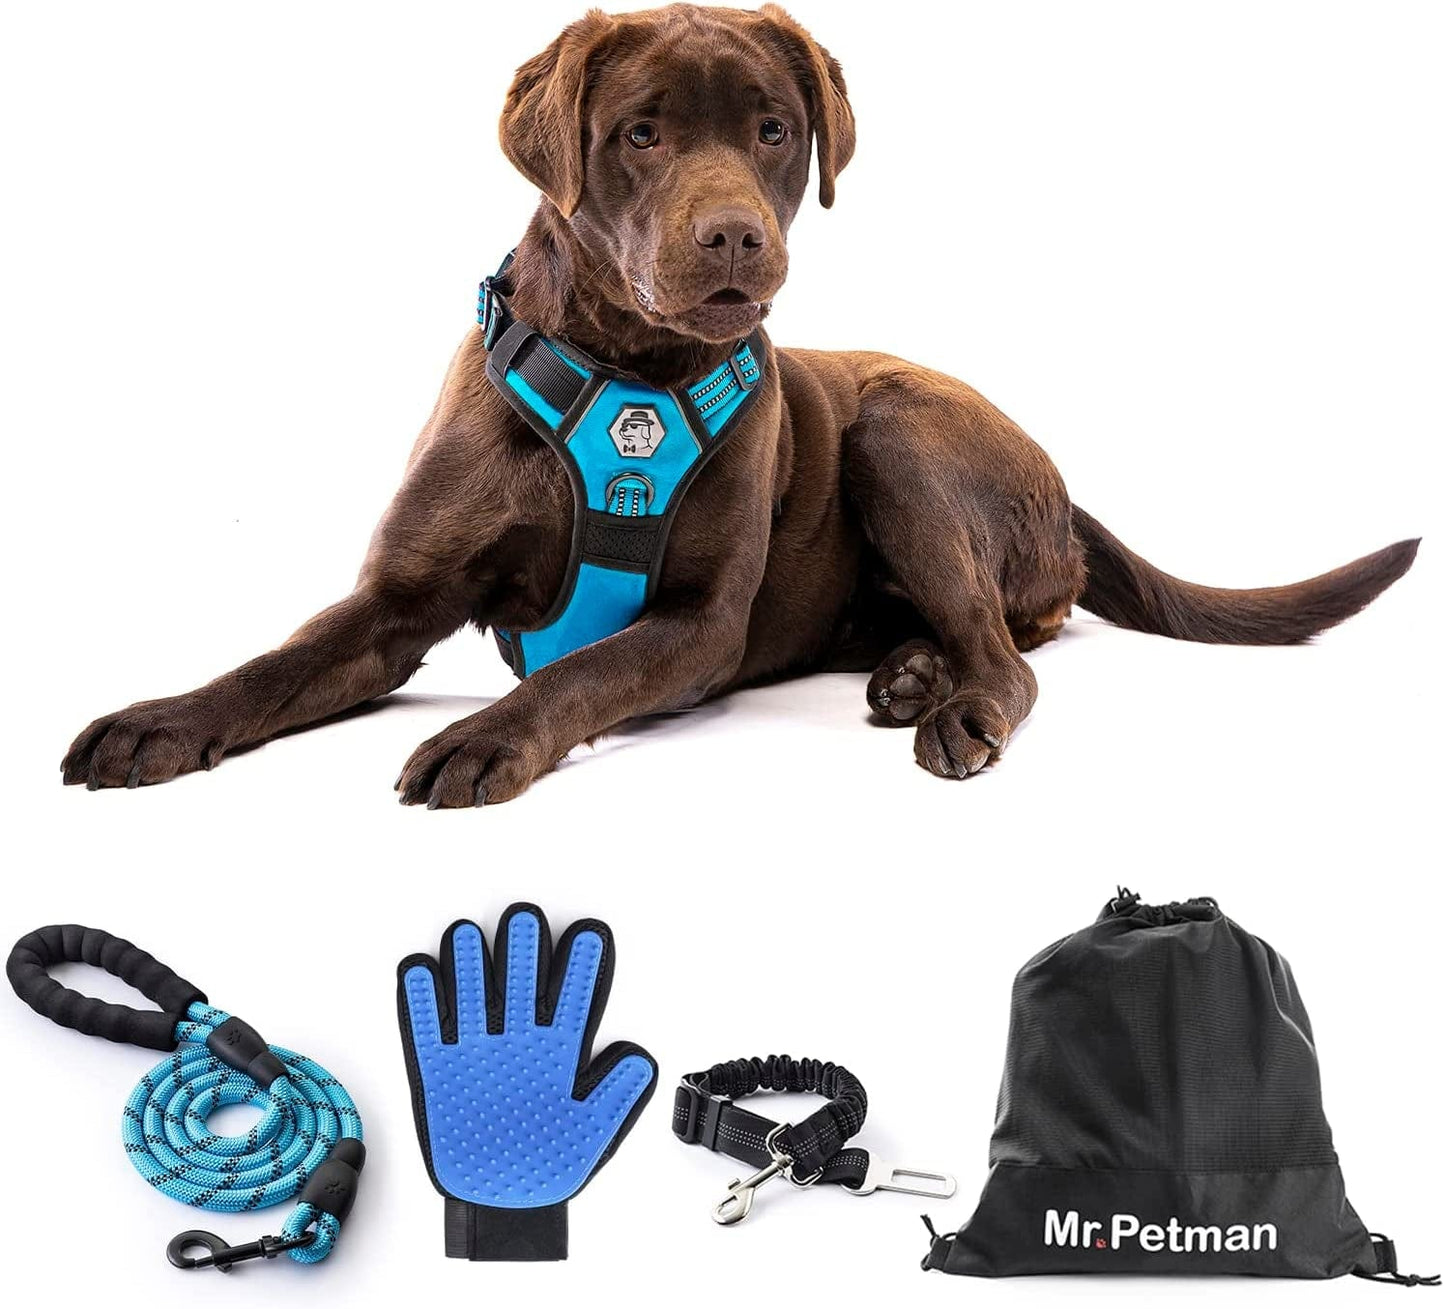 MR. PETMAN No Pull Dog Harness with Leash, Seat Belt, Grooming Glove - No Choke Dog Harness Set for Small Medium Large Dogs- Reflective Adjustable Dog Vest Harnesses with Handle for Walking Training Animals & Pet Supplies > Pet Supplies > Dog Supplies > Dog Apparel Mr. Petman Sky Blue Large 